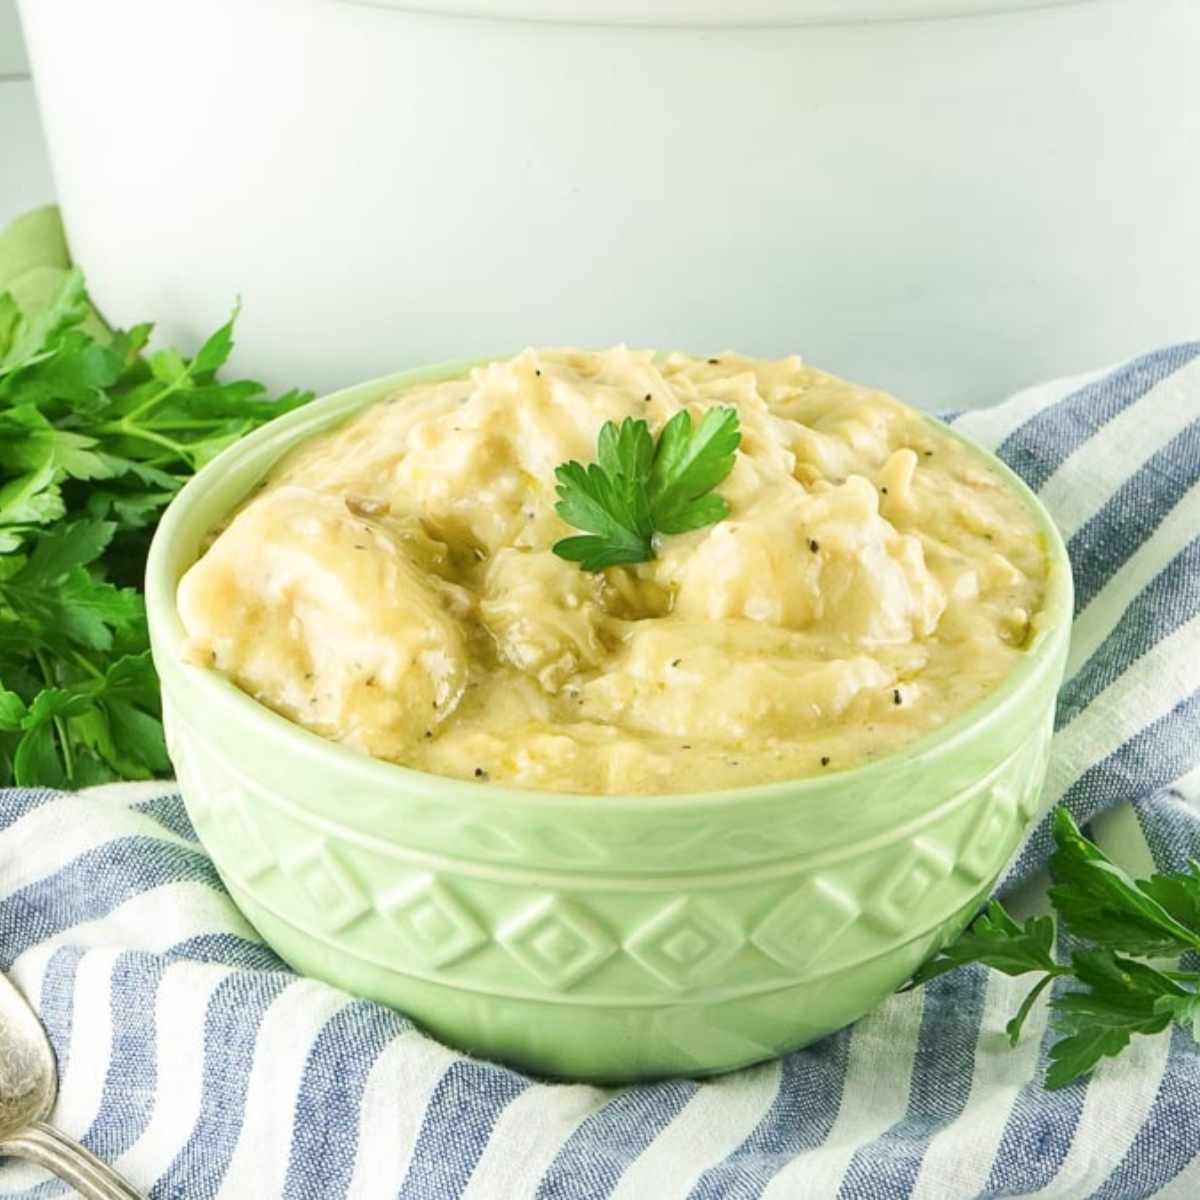 a green bowl filled with slow cooker chicken and dumplings made with biscuits